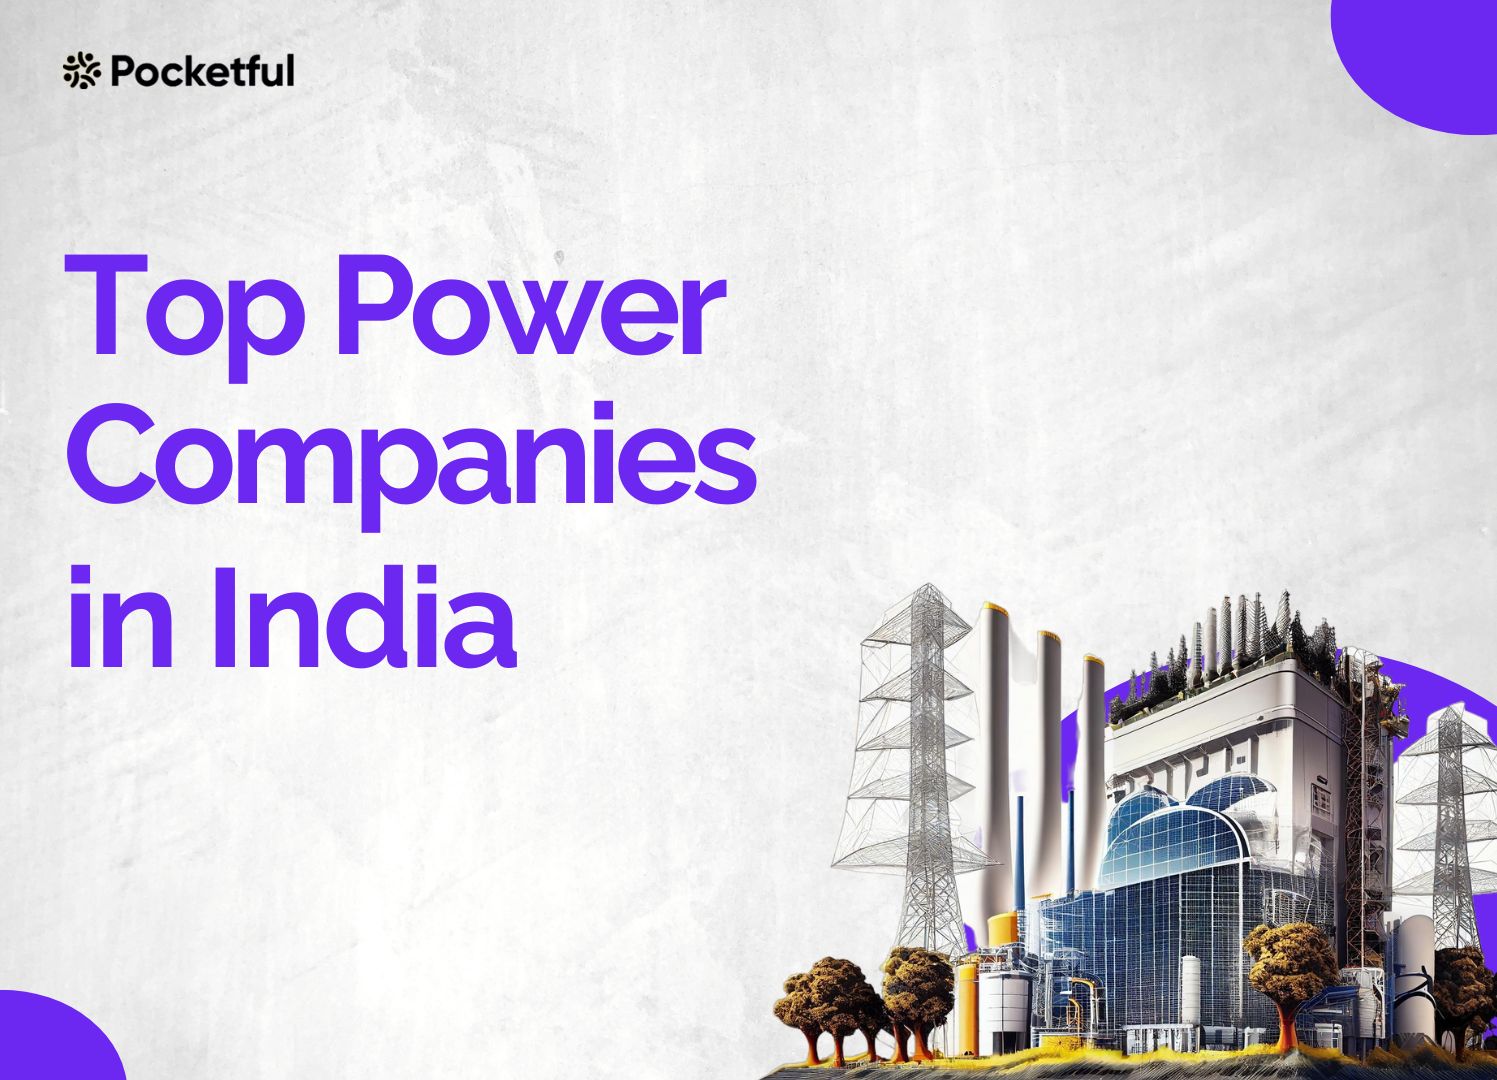 Top Power Companies in India